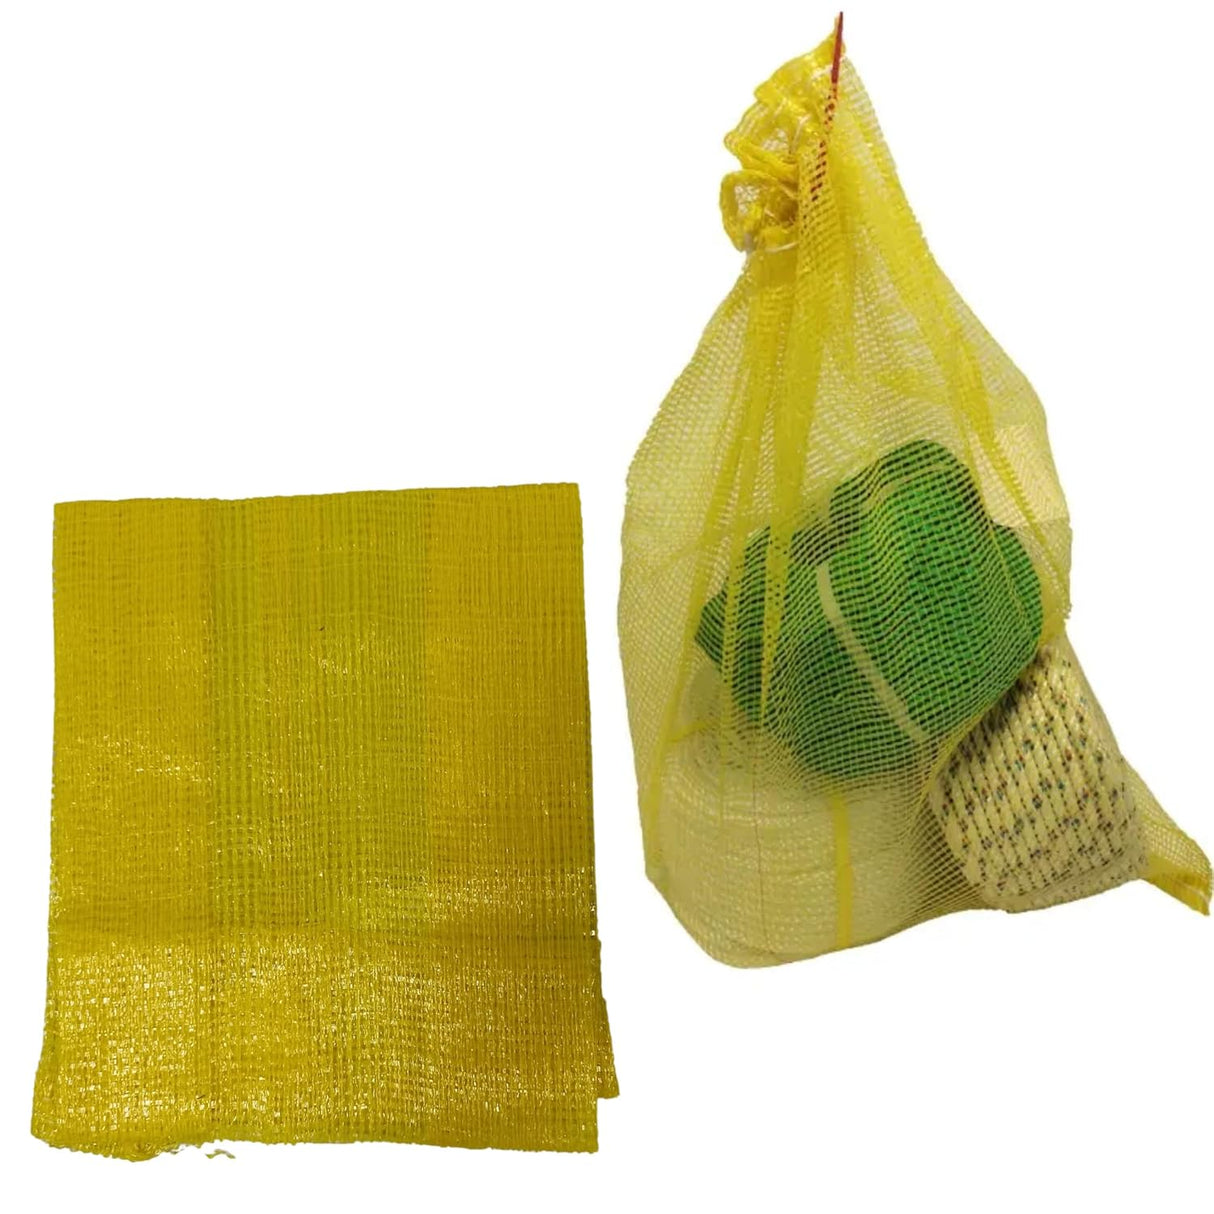 SINGHAL PP Mesh Storage Bags 22x32 Inch with Drawstring, Yellow Color | Upto 40kg Capacity Great for Packaging Produce, Vegetables and Fruit | Multipurpose Bora, Bori (5)